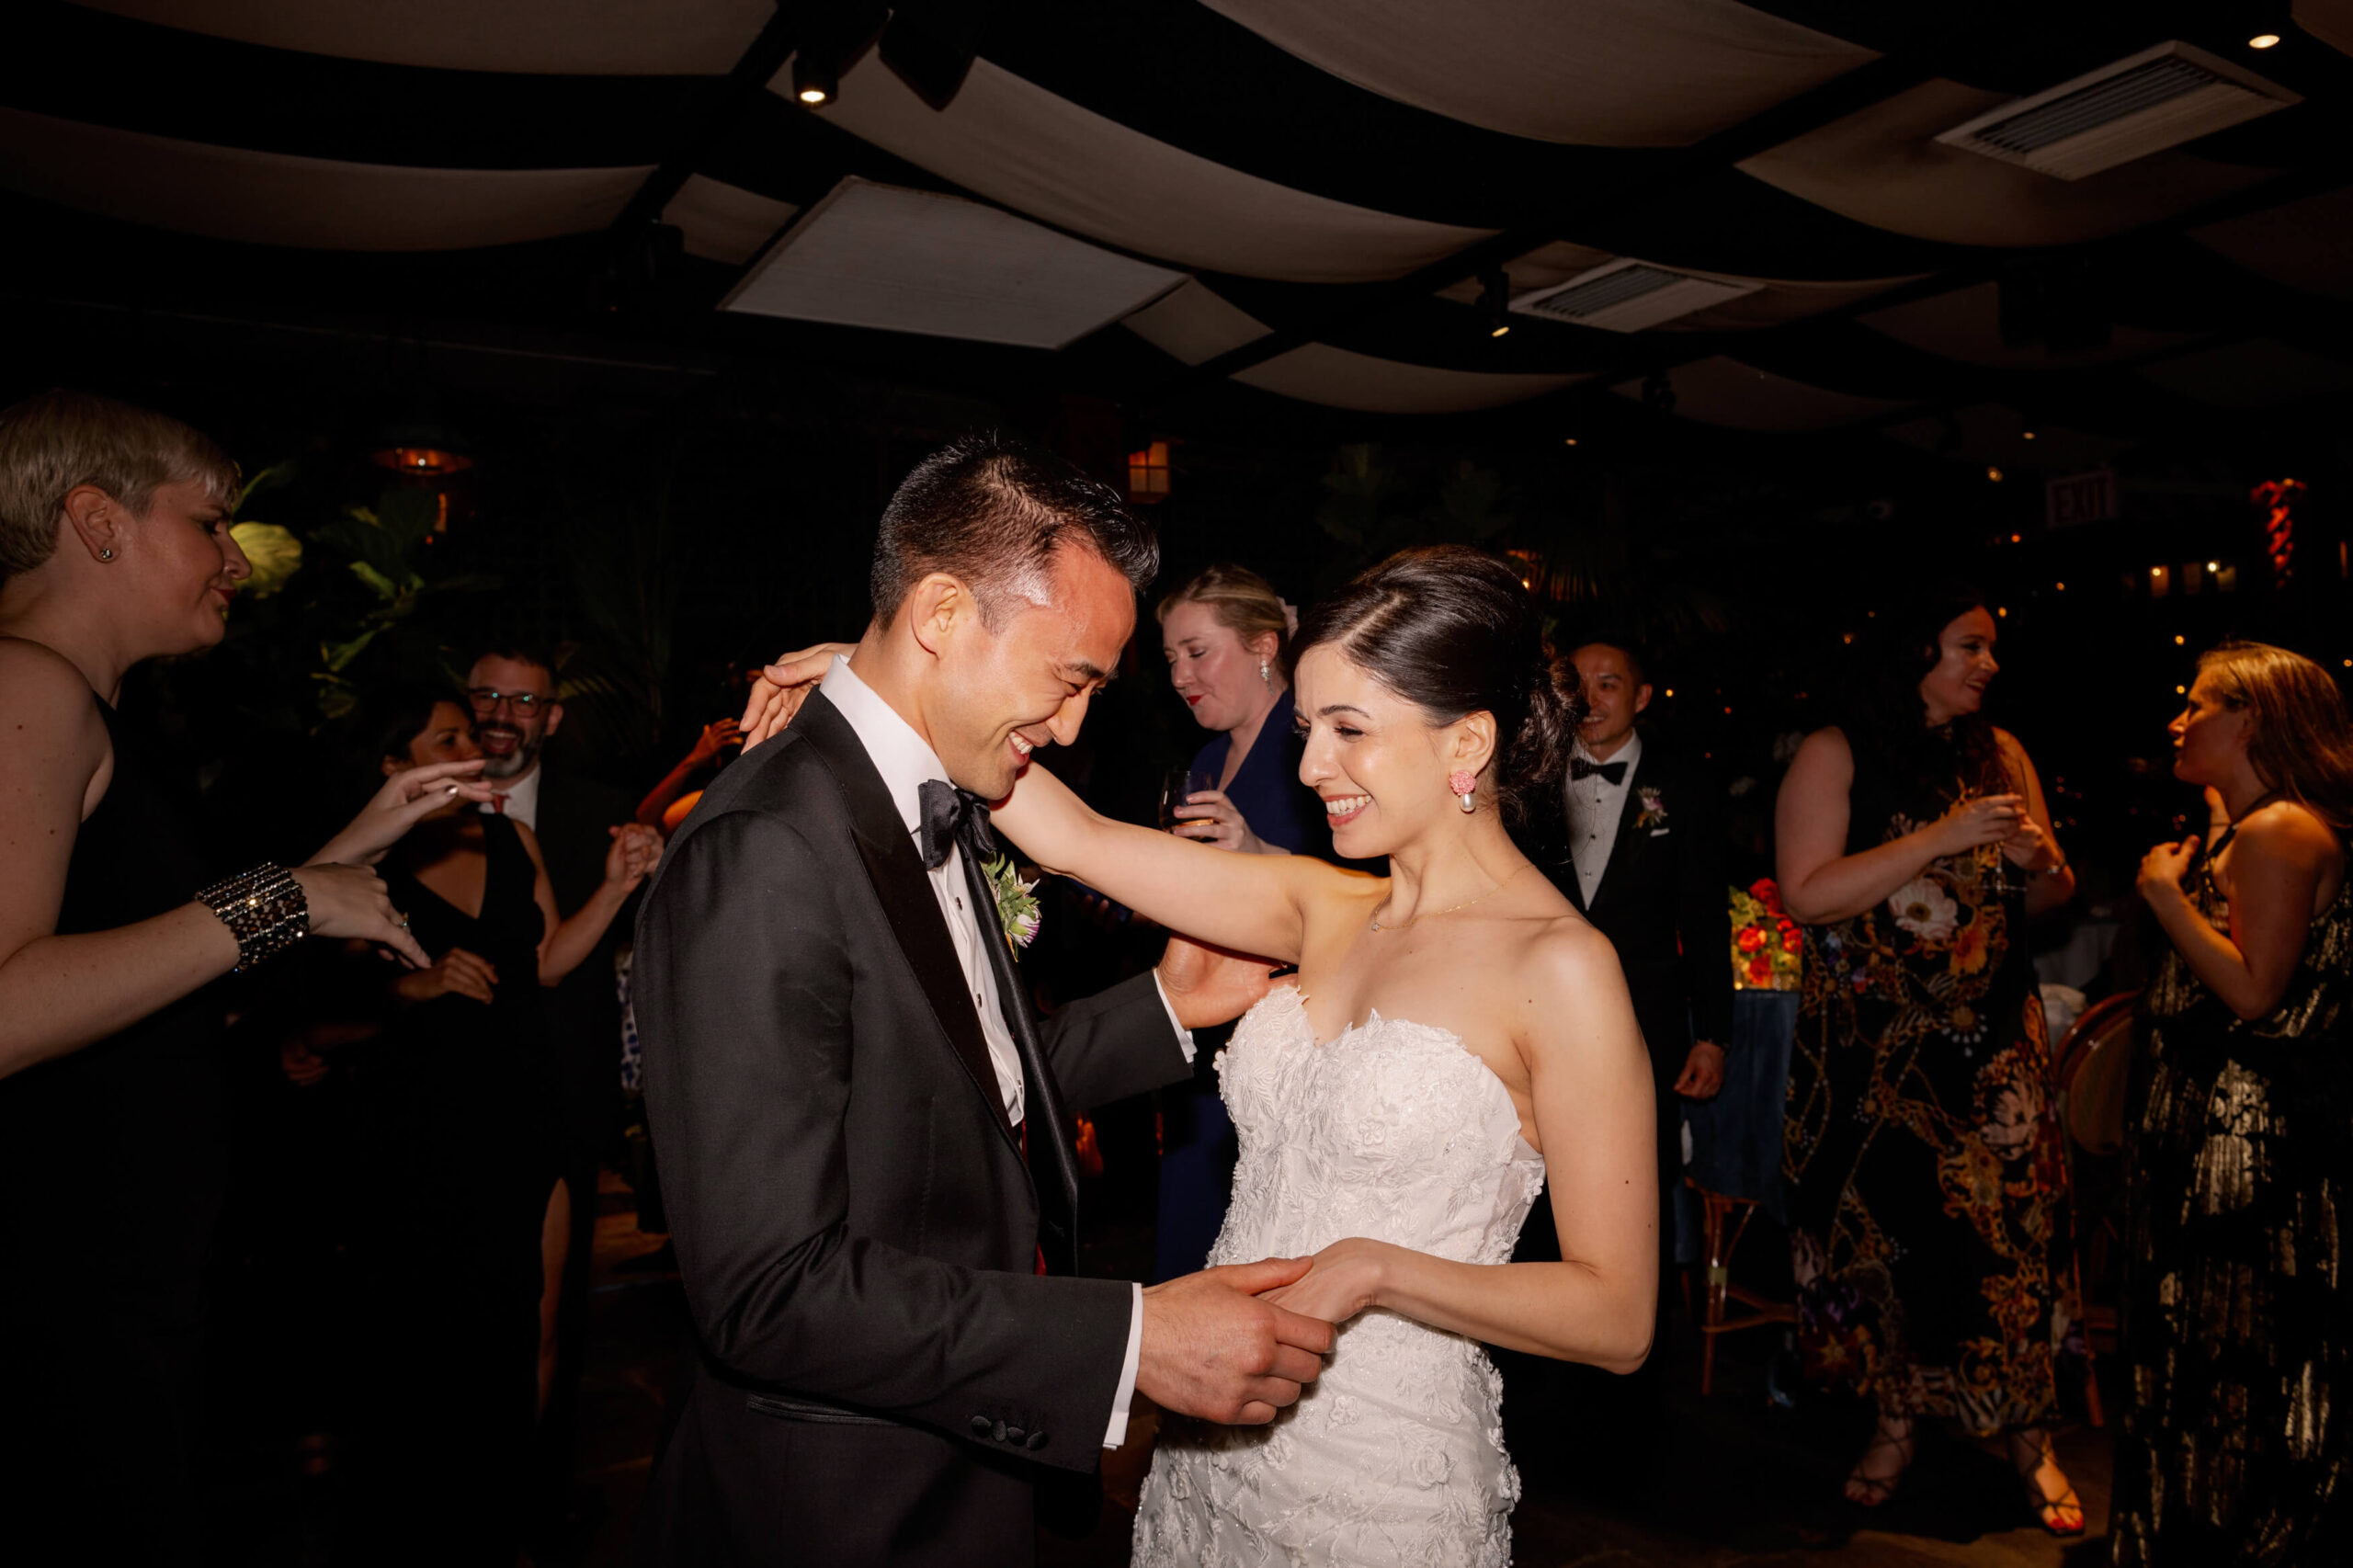 The newlyweds are dancing along with the guests on the dance floor. Intimate wedding image by Jenny Fu Studio